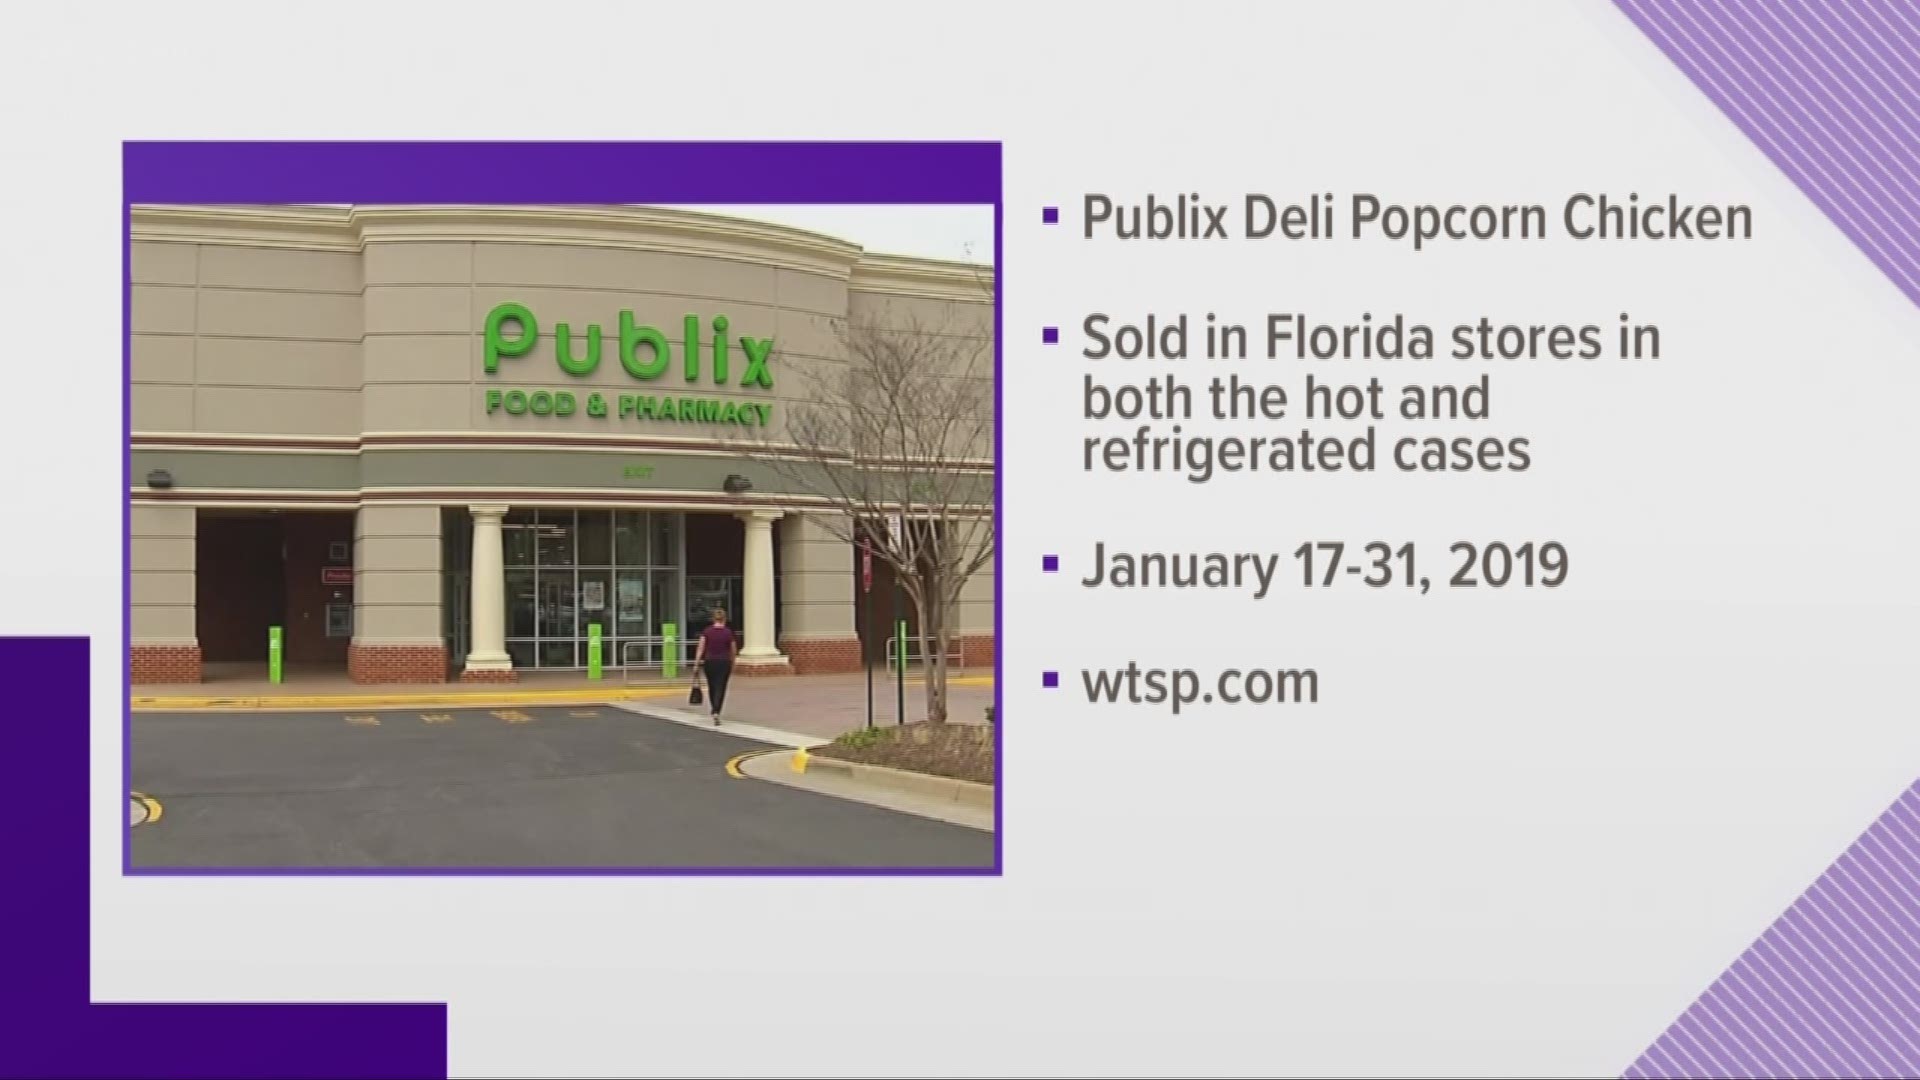 The chicken came from the Pilgrim's pride and it might contain foreign material. The popcorn chicken was sold in both the hot and the refrigerated cases this week here in Florida.